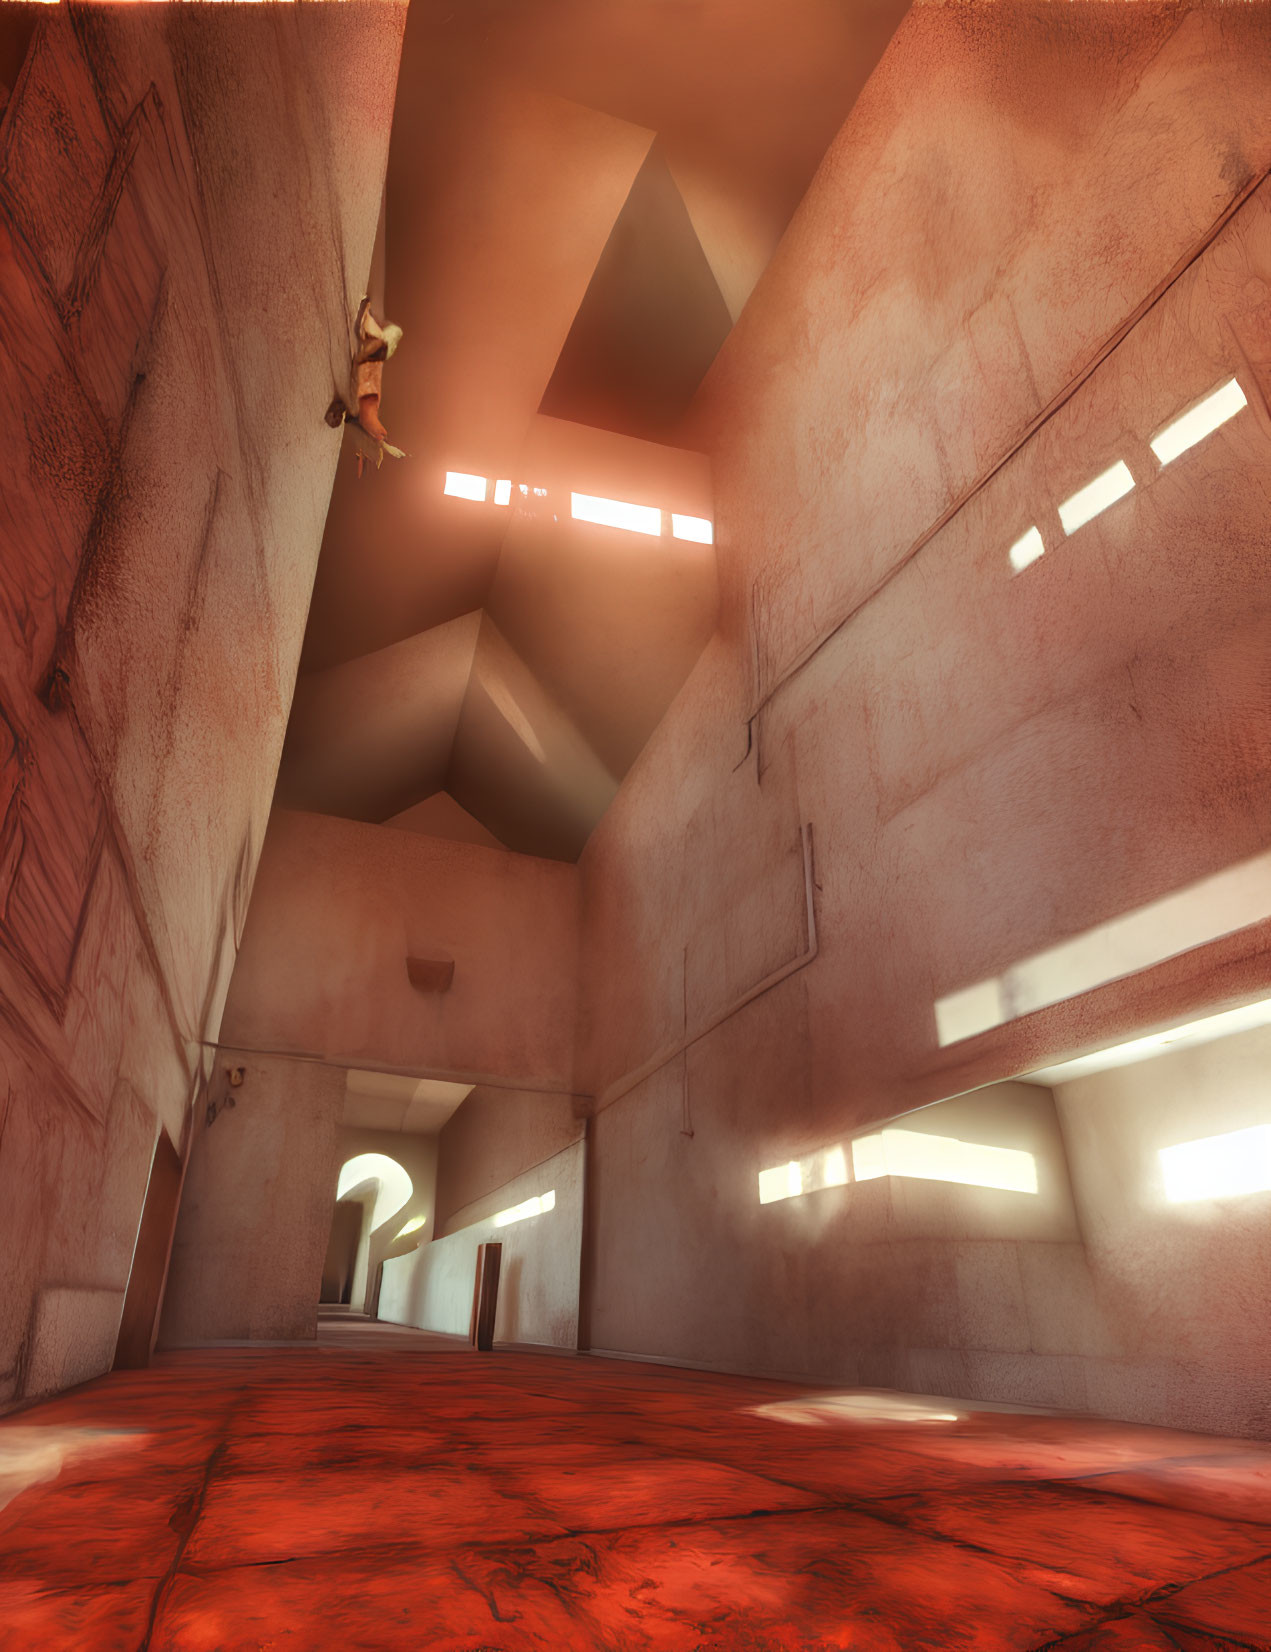 Surreal angular structure with red floor and climbing figure